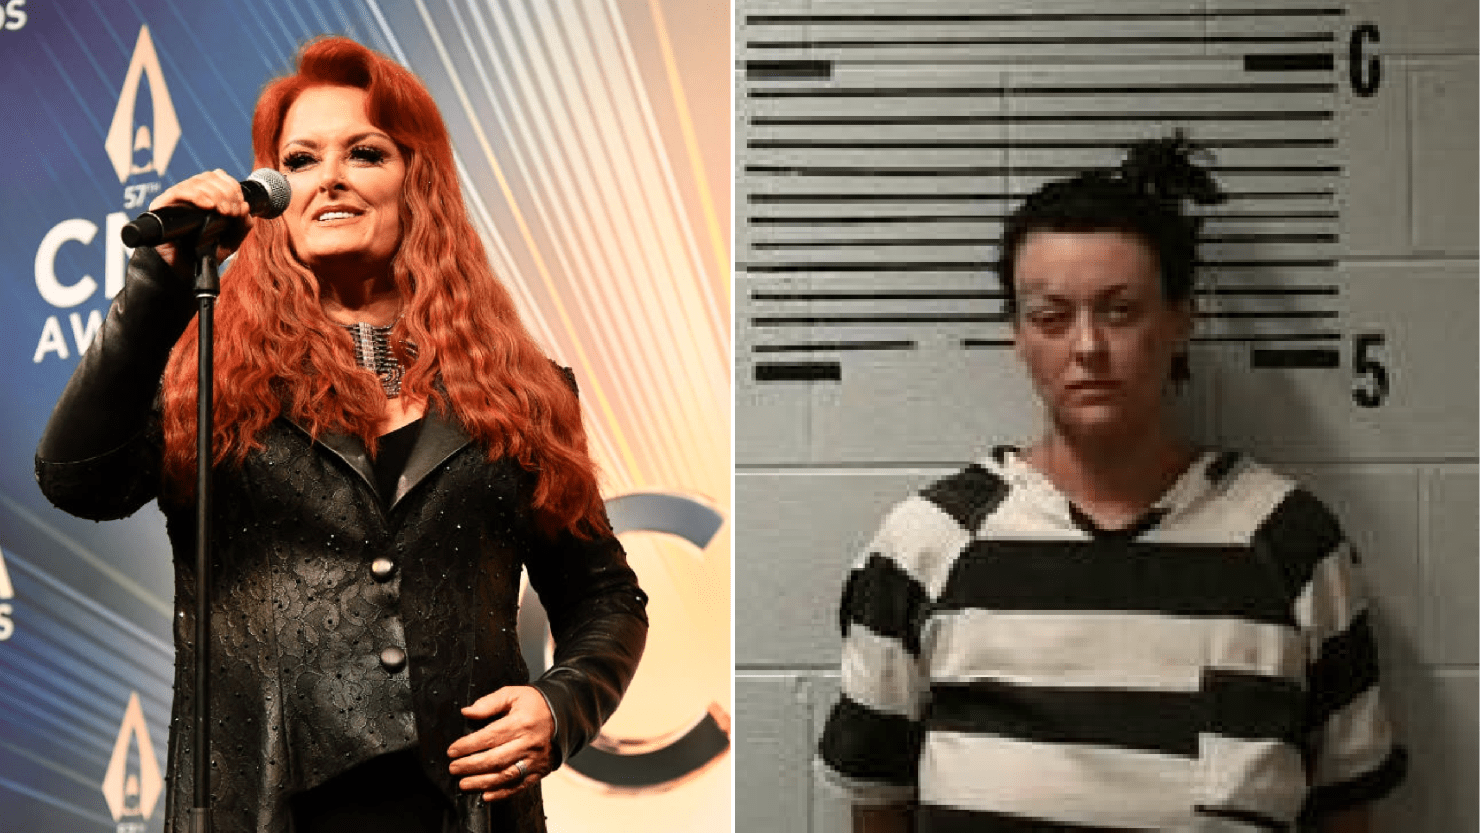 Wynonna Judd’s Daughter Grace Kelley Facing Soliciting Prostitution Charges Alongside Indecent Exposure Arrest